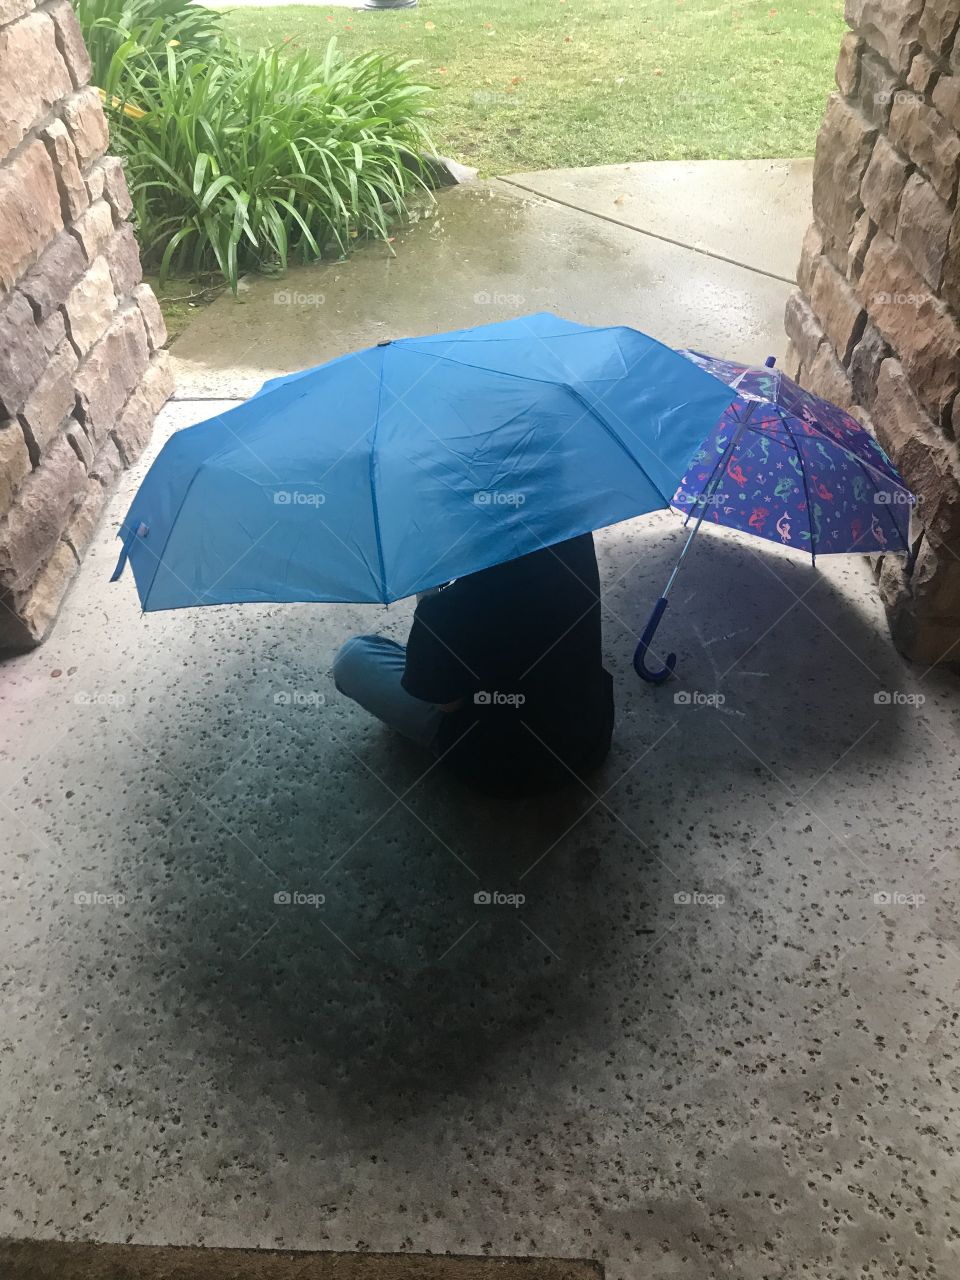 Keeping dry from the rain with a big umbrella 